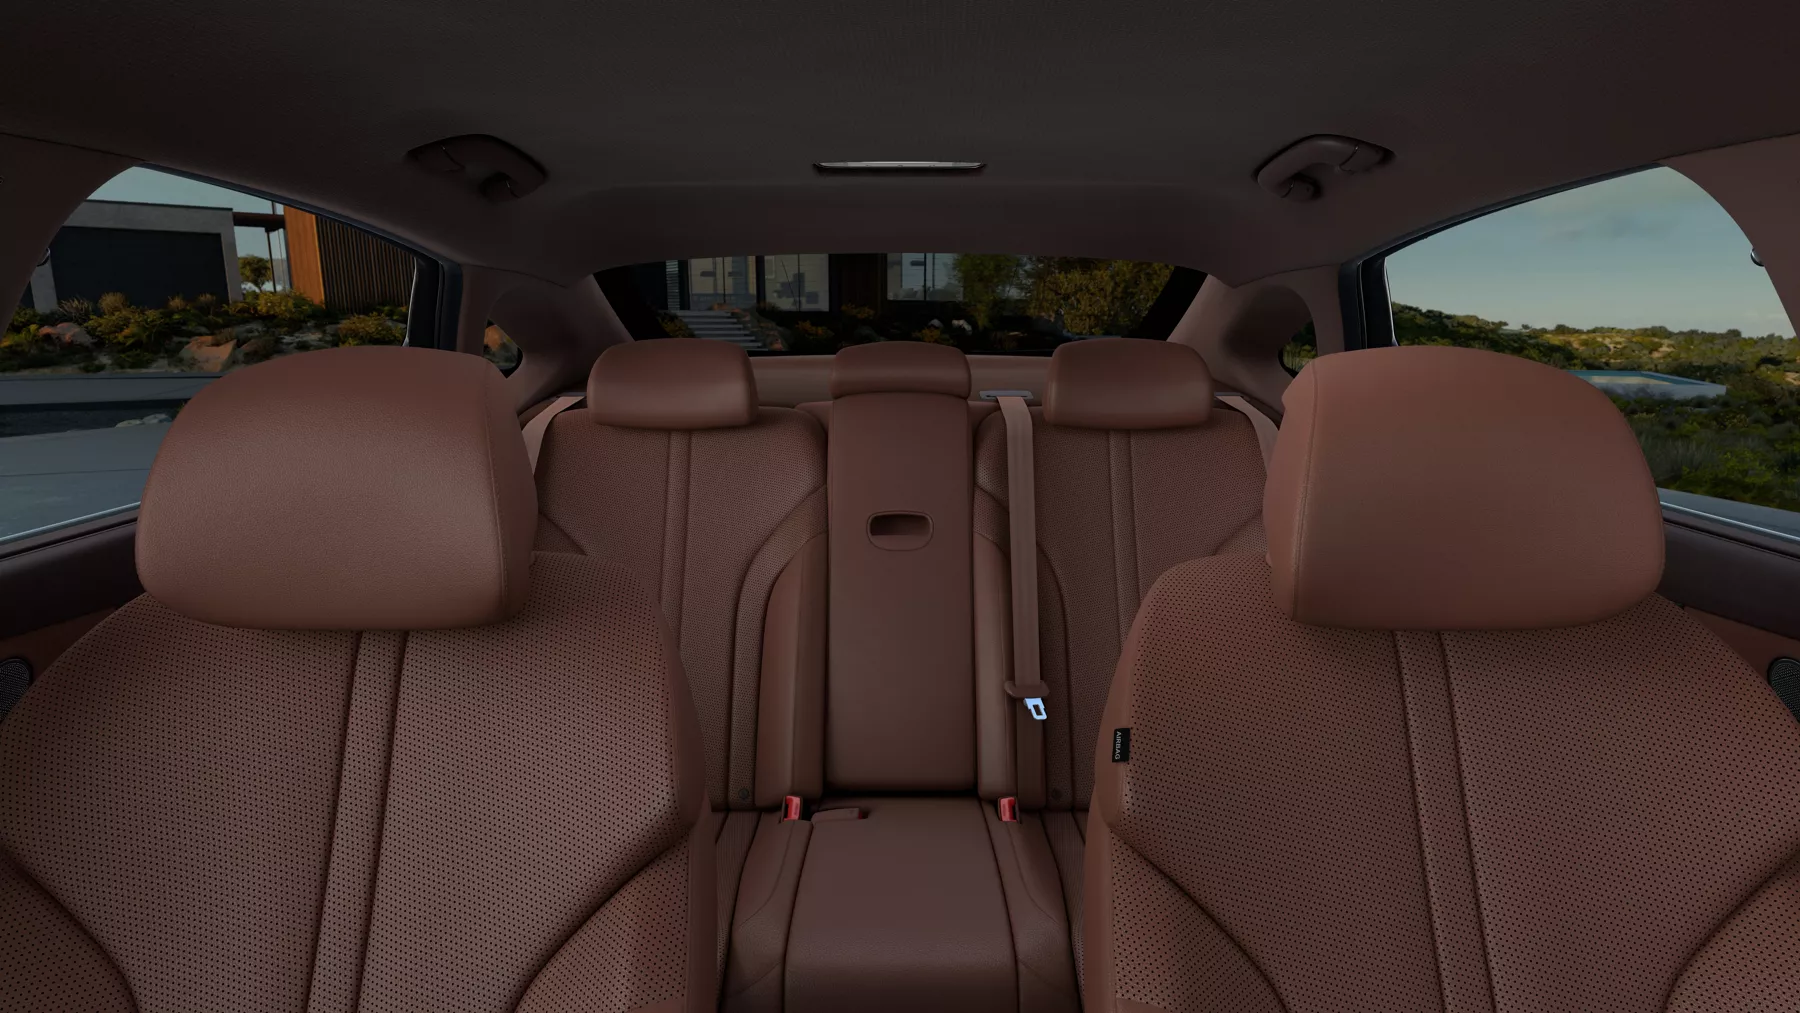 G80 front and rear seats in brown color.